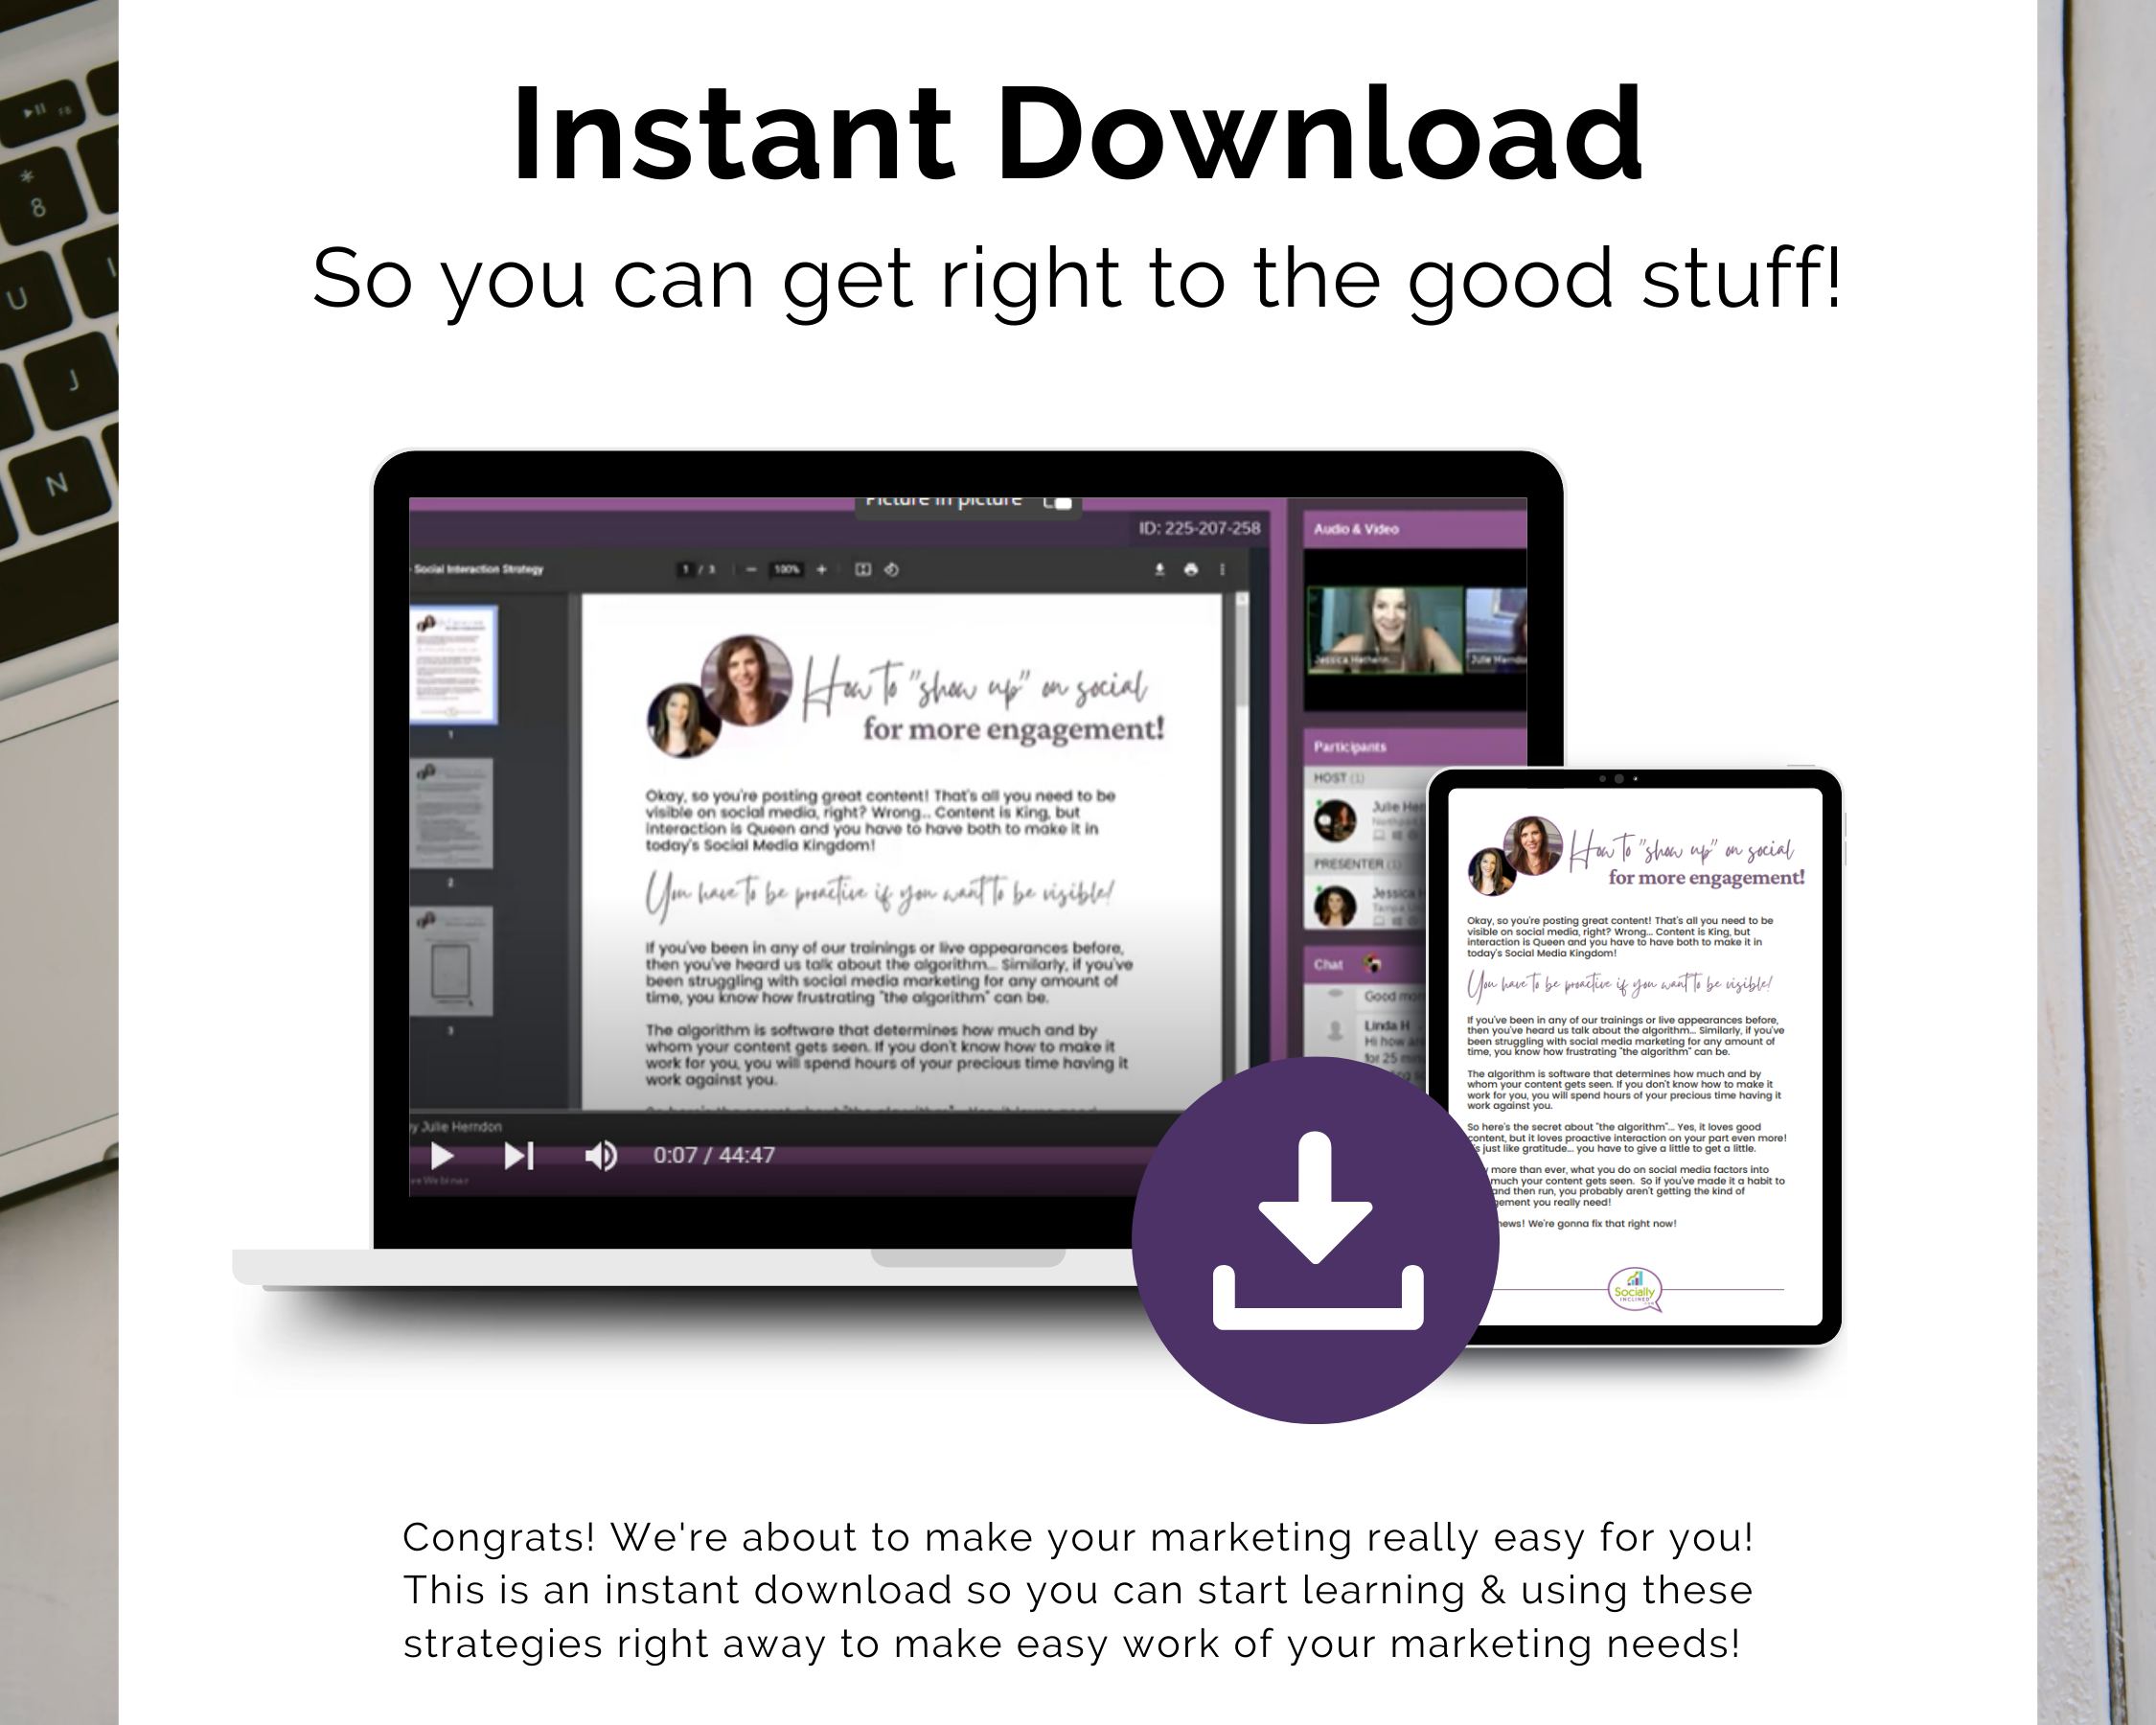 Instant download for immediate access to all the exciting TAT - Social Interaction Strategy Masterclass content. Get right to the good stuff with fast and easy retrieval from Get Socially Inclined.